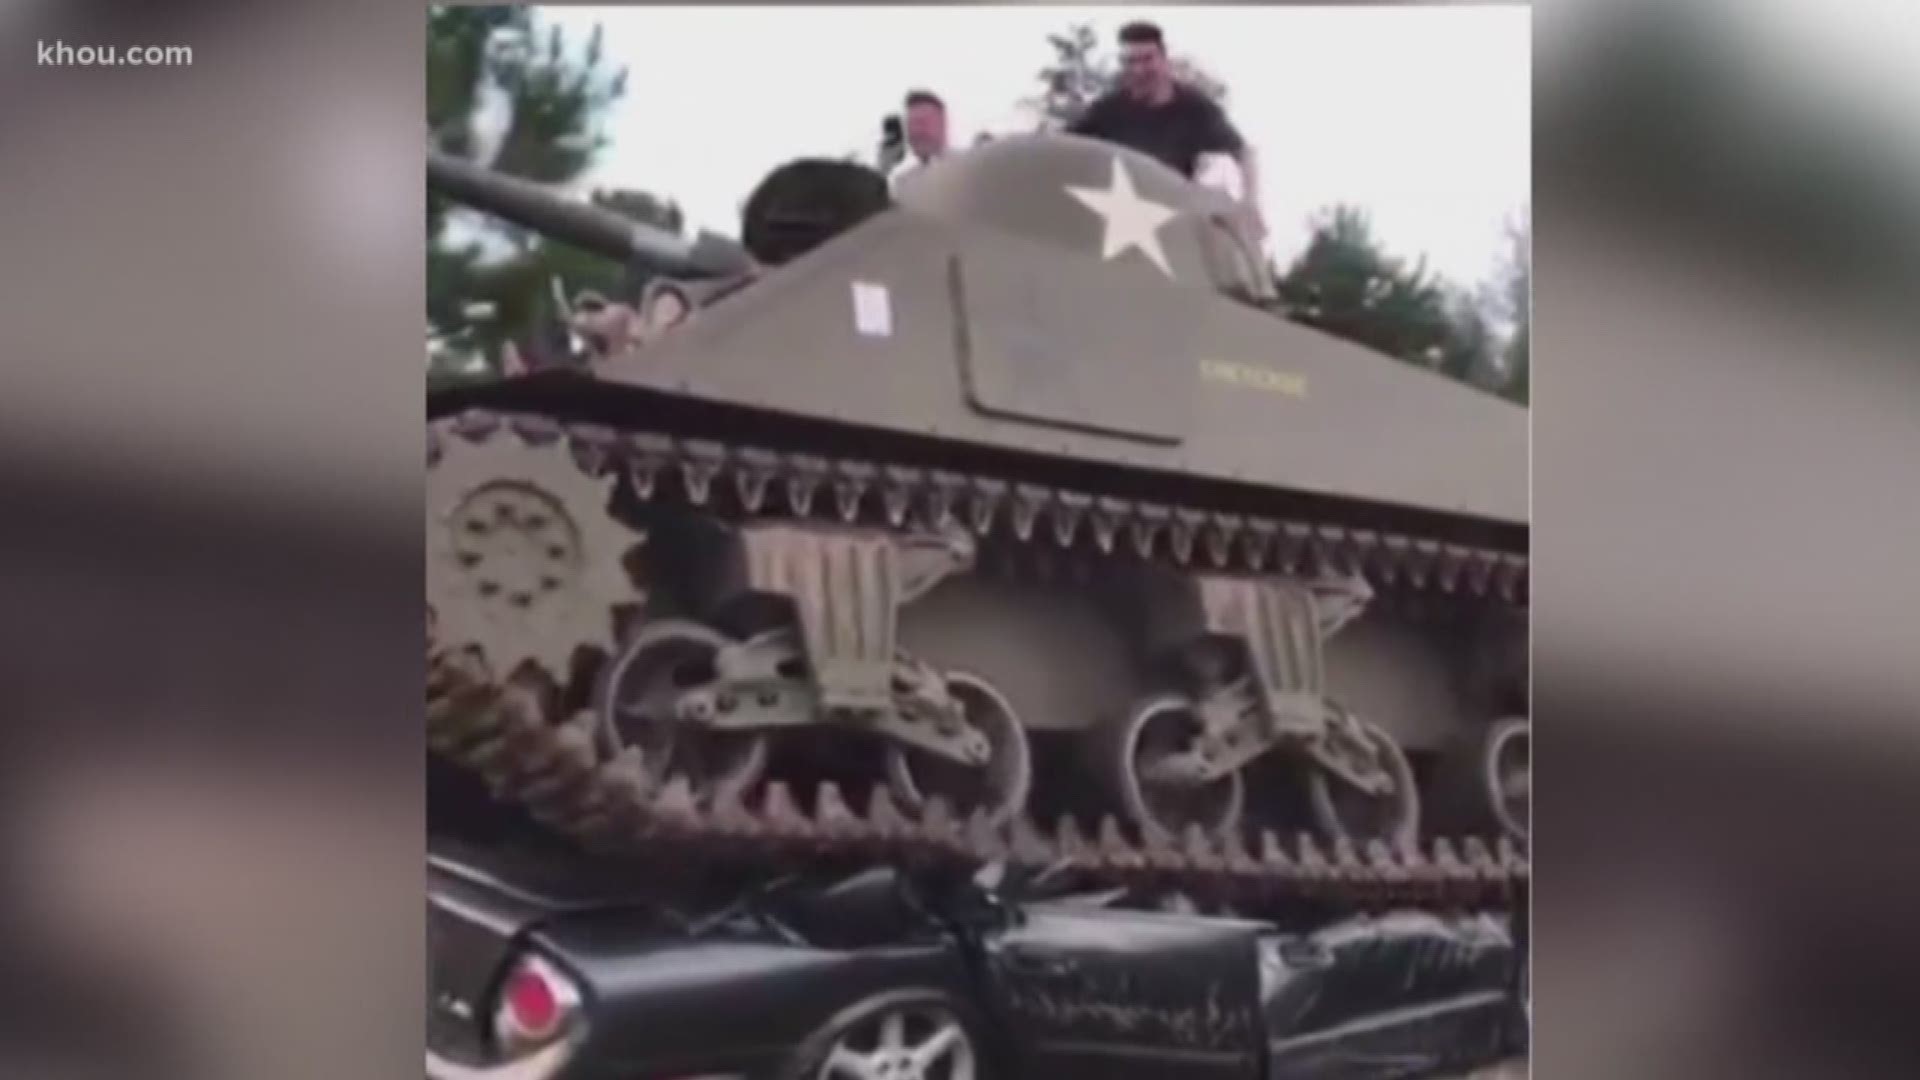 making history the second world war buy tanks